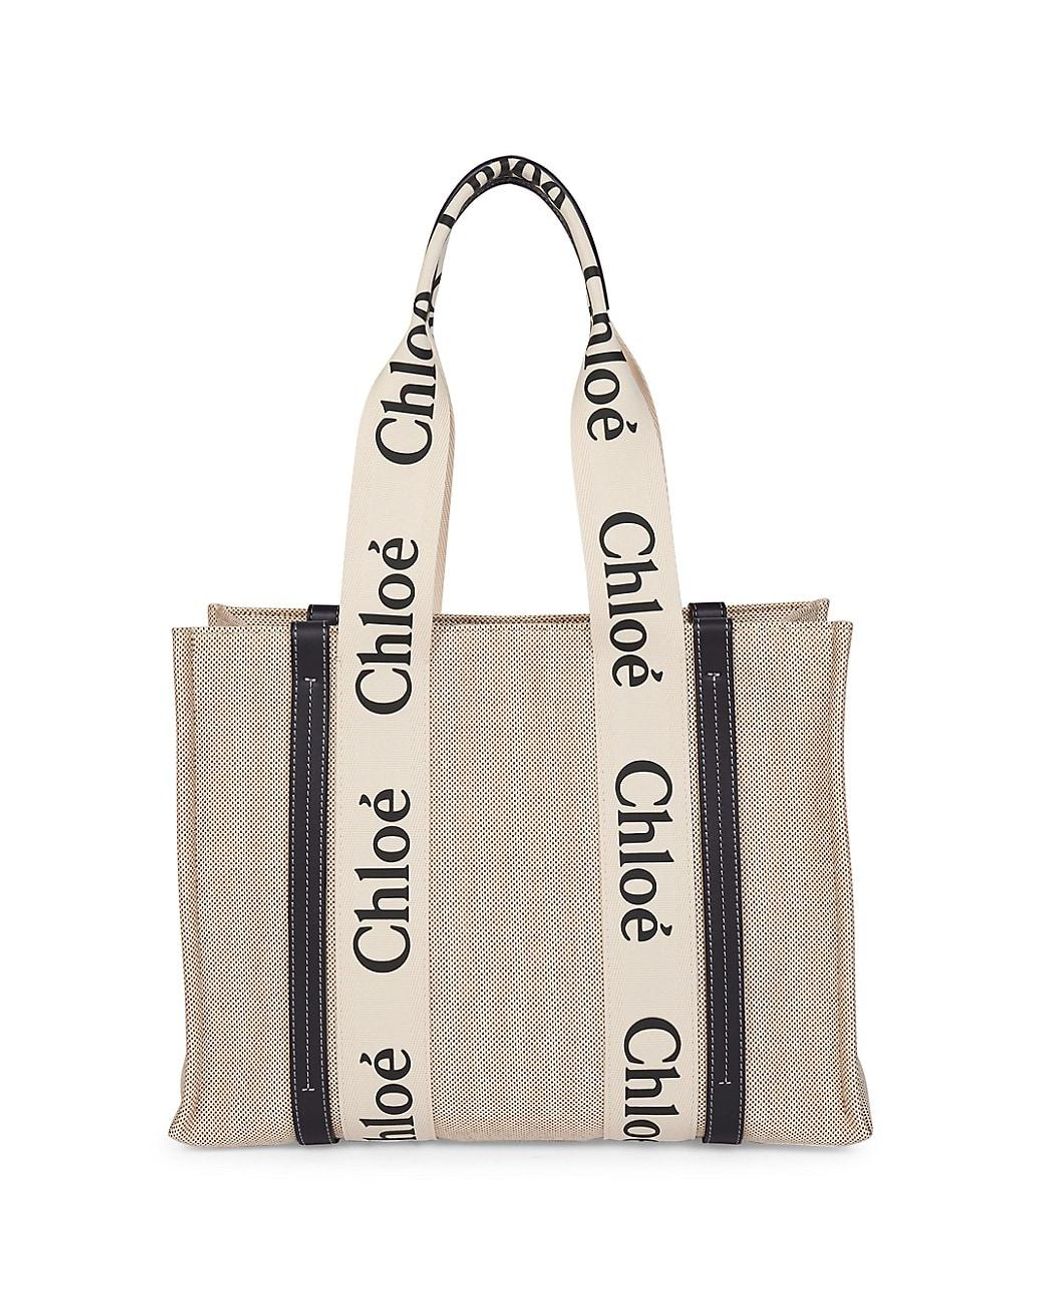 Chloé Medium Woody Canvas Tote in White Blue (White) - Lyst